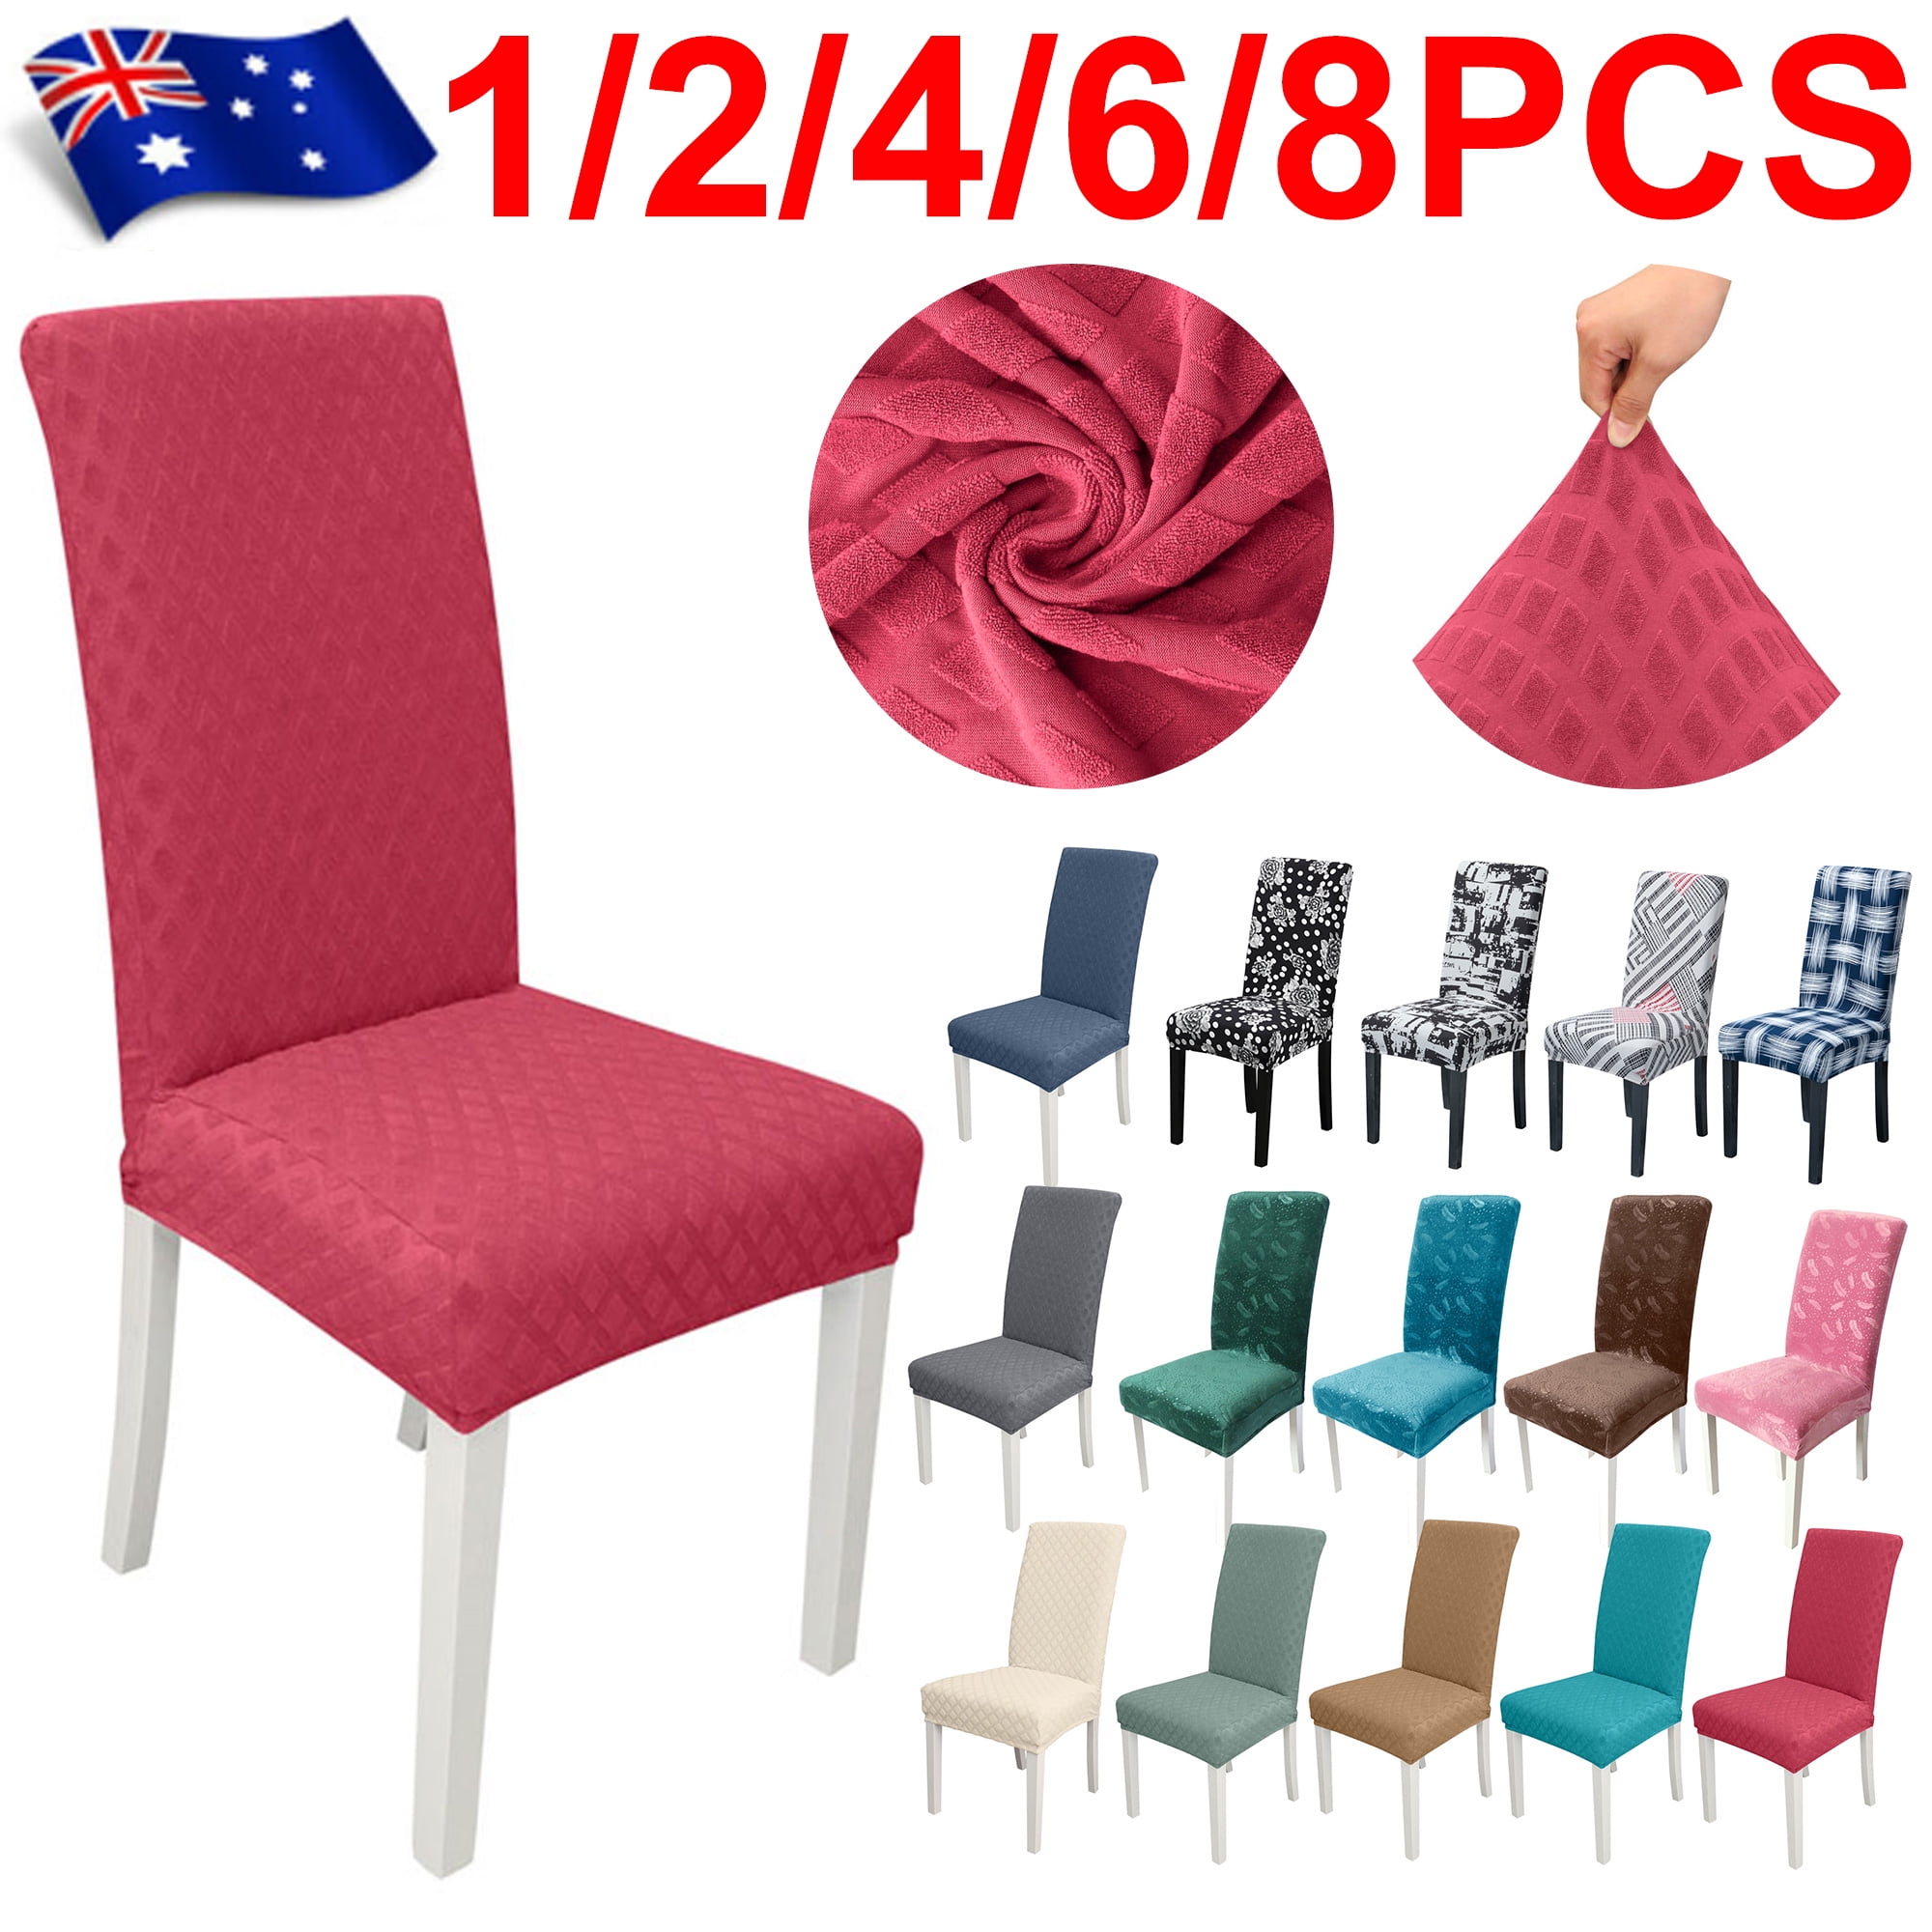 1/2/4pcs Universal Elastic Dining Chair Cover Slipcovers Seat Protective Covers